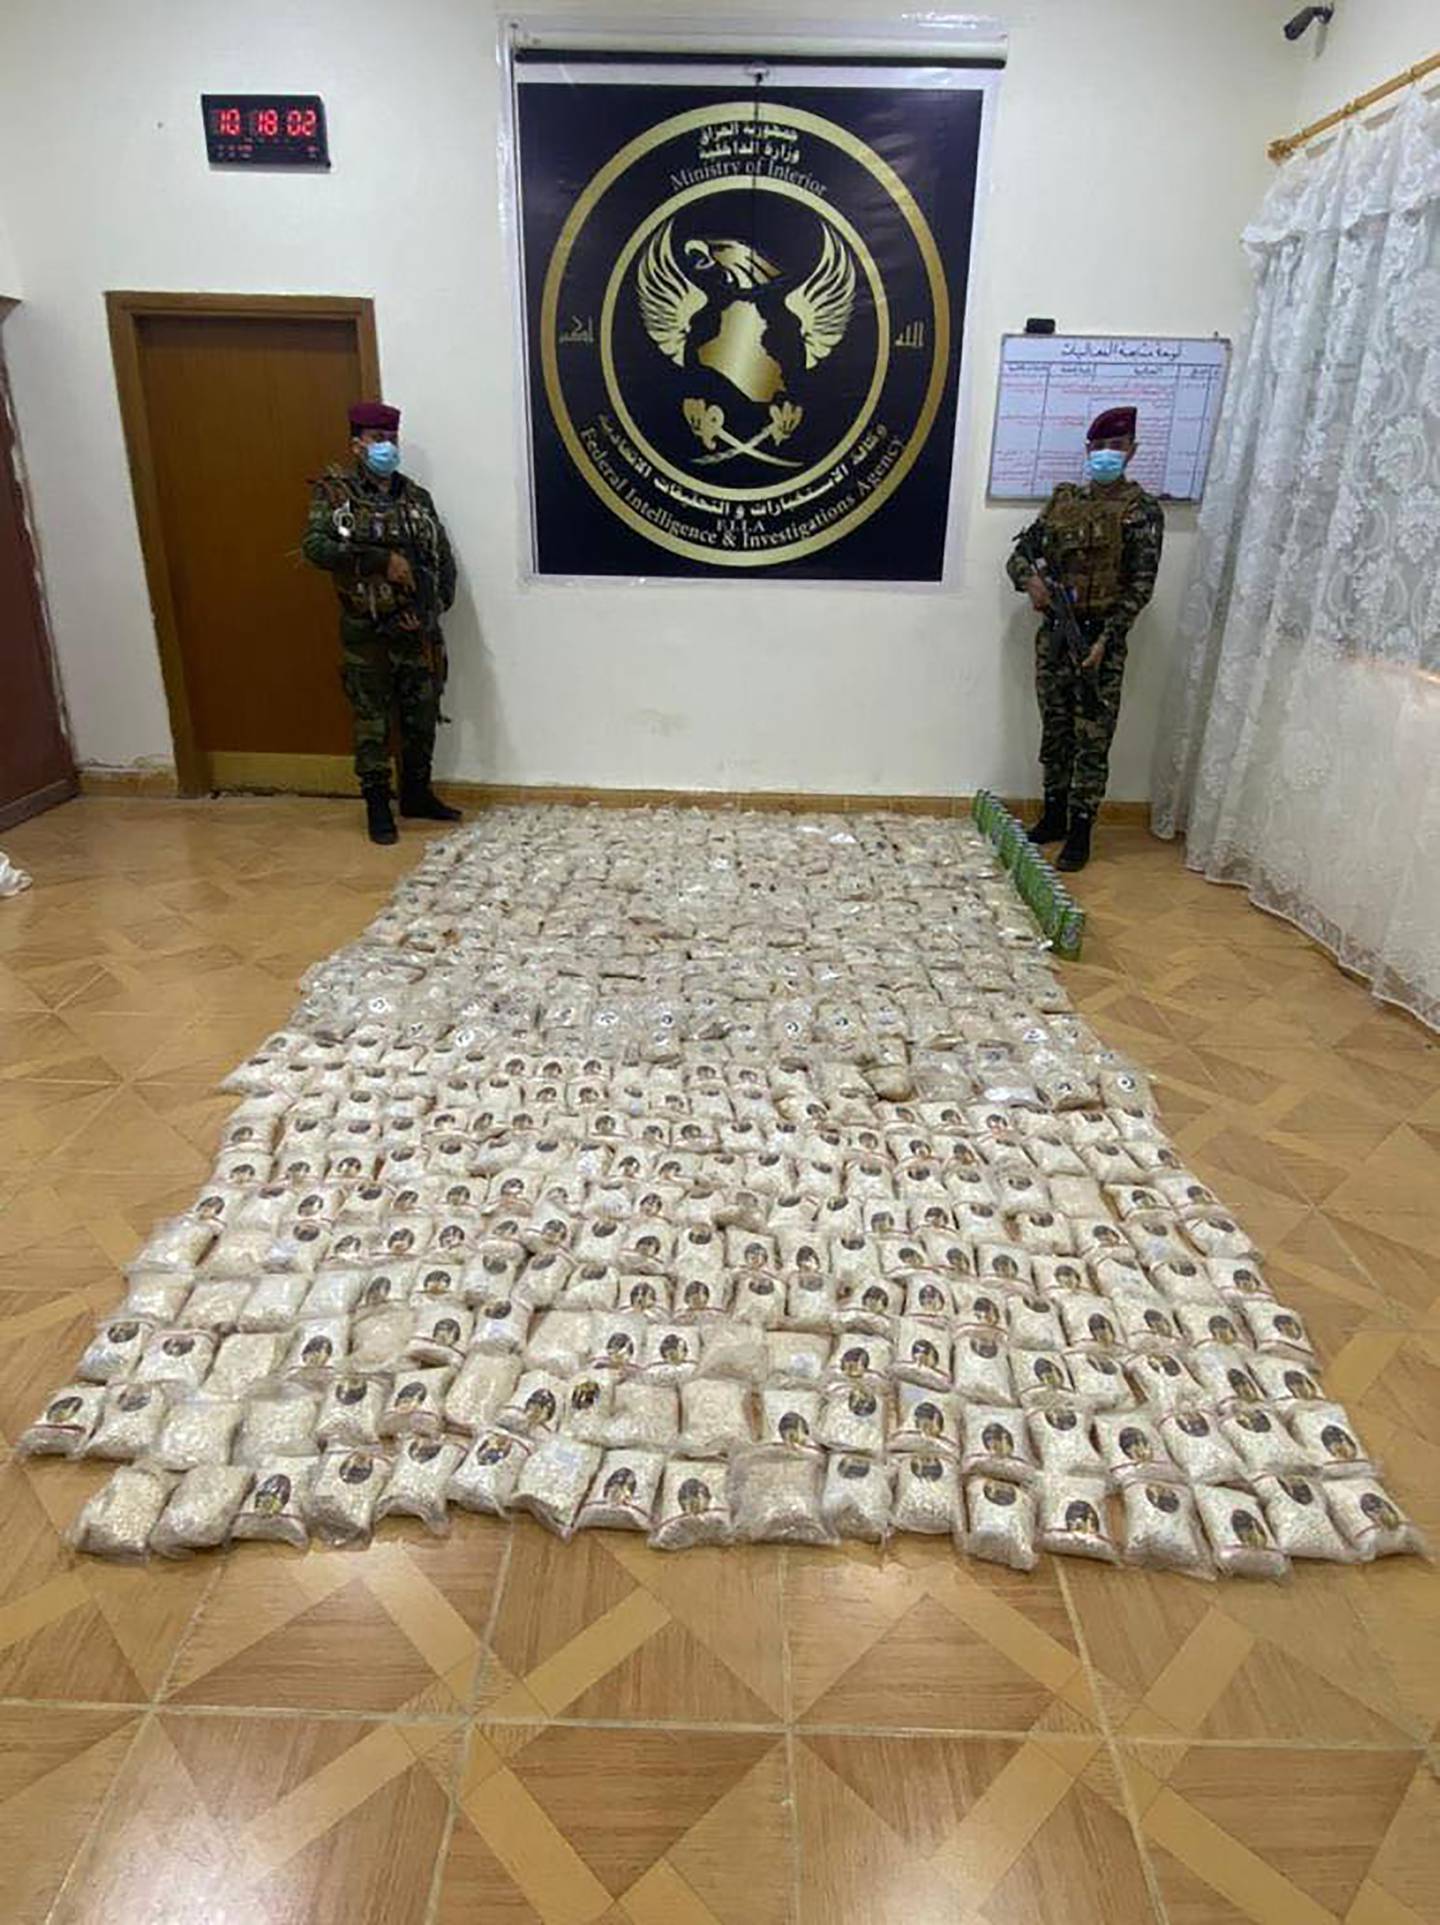 Iraq security forces seize one million narcotic pills on a sailplane in Basra. Photo: Iraq Federal Investigations and Intelligence Agency